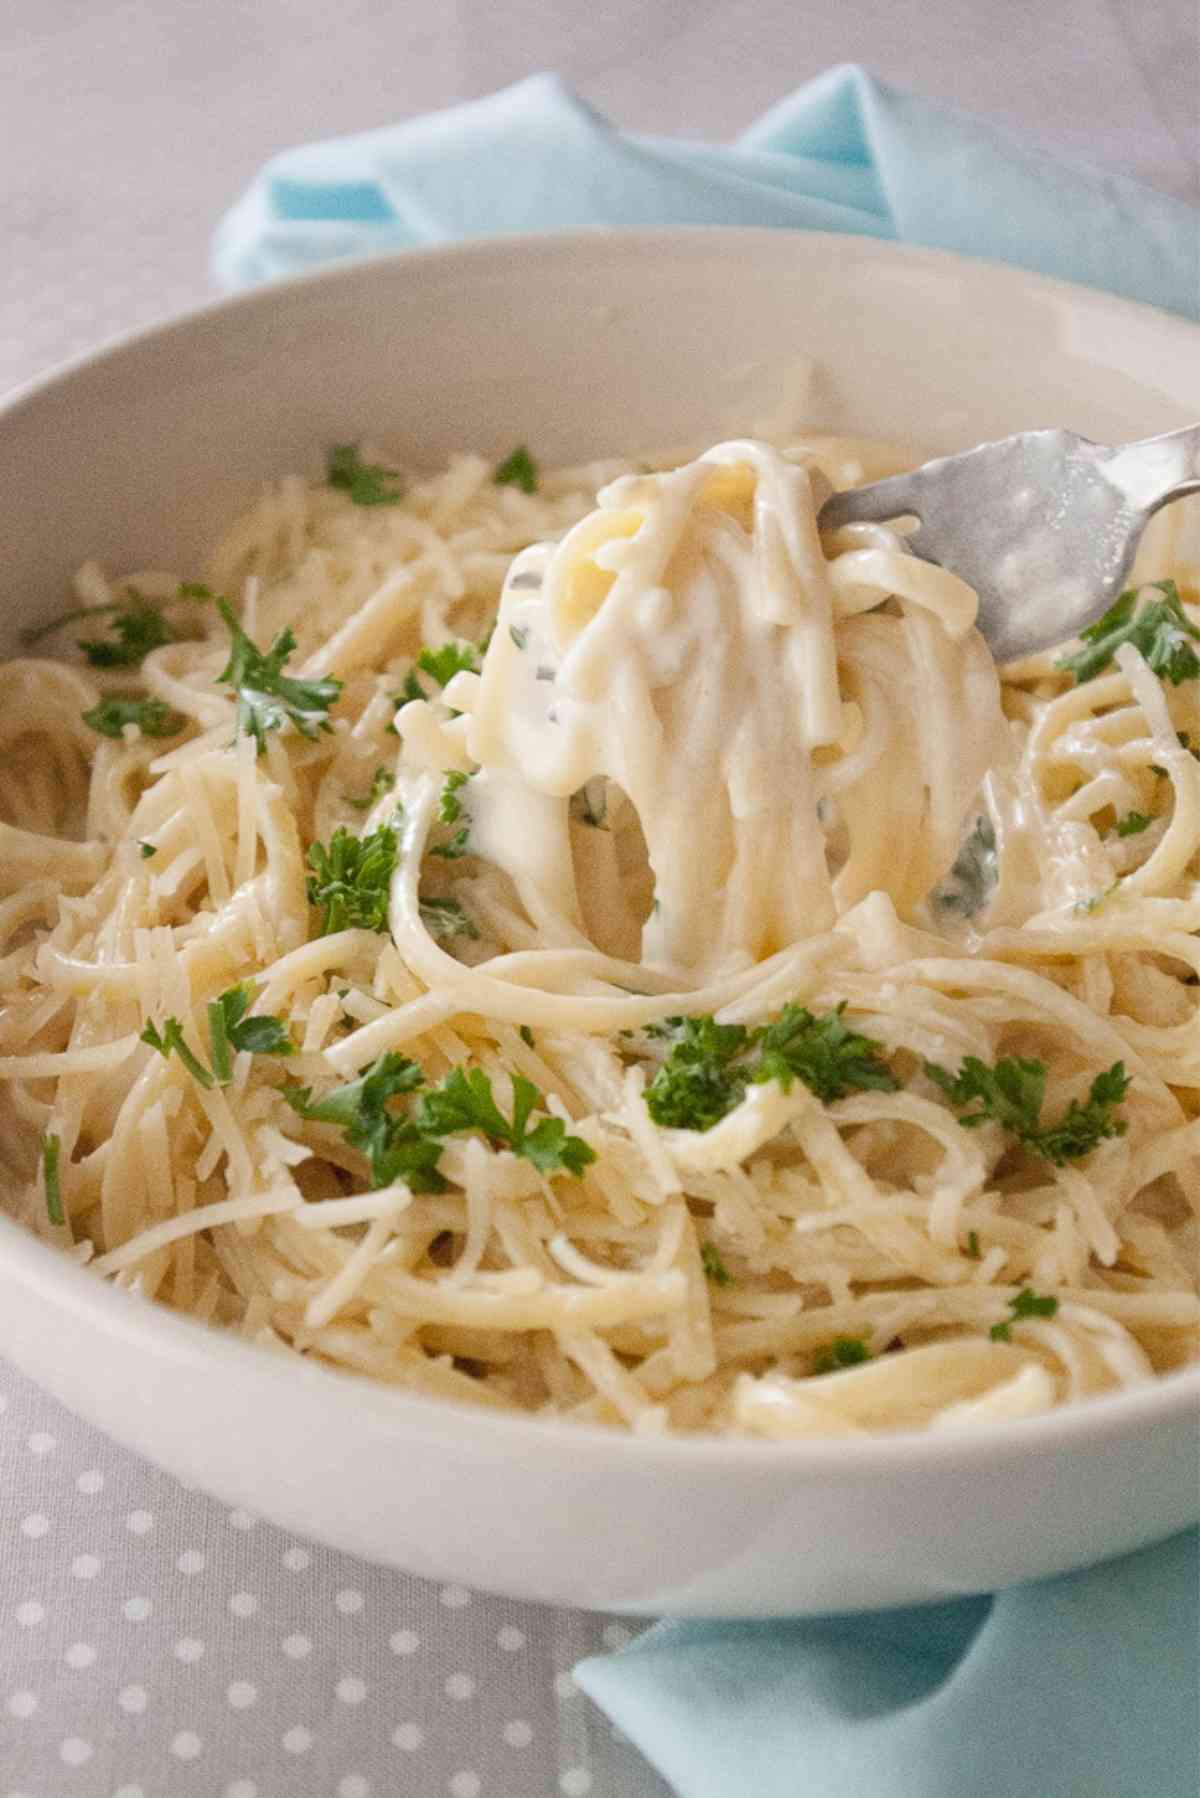 A bowl of pasta and alfredo sauce.